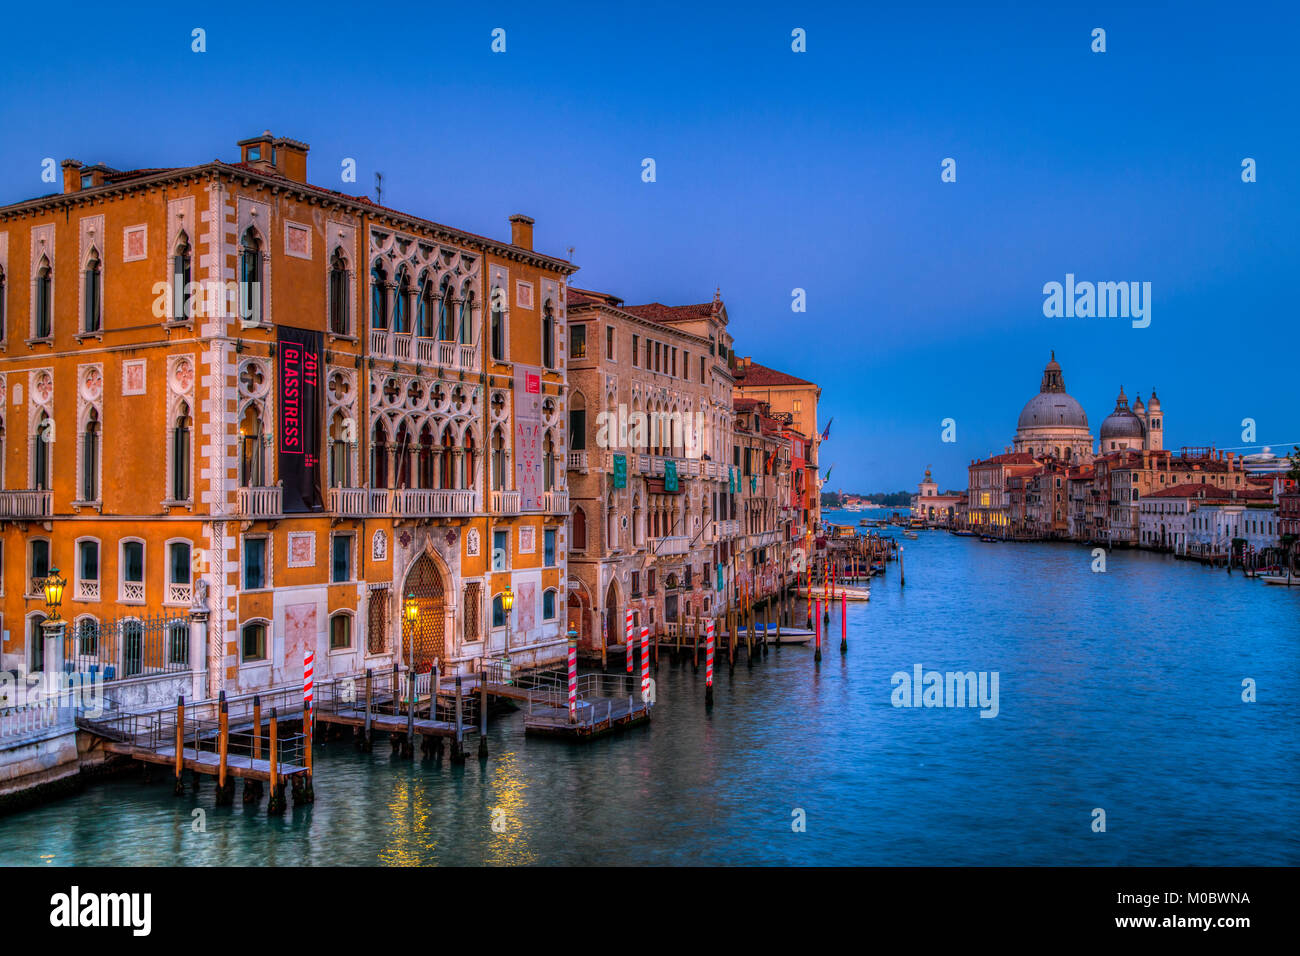 An evening view of the Grand Canal, Veneto, Venice, Italy, Europe. Stock Photo